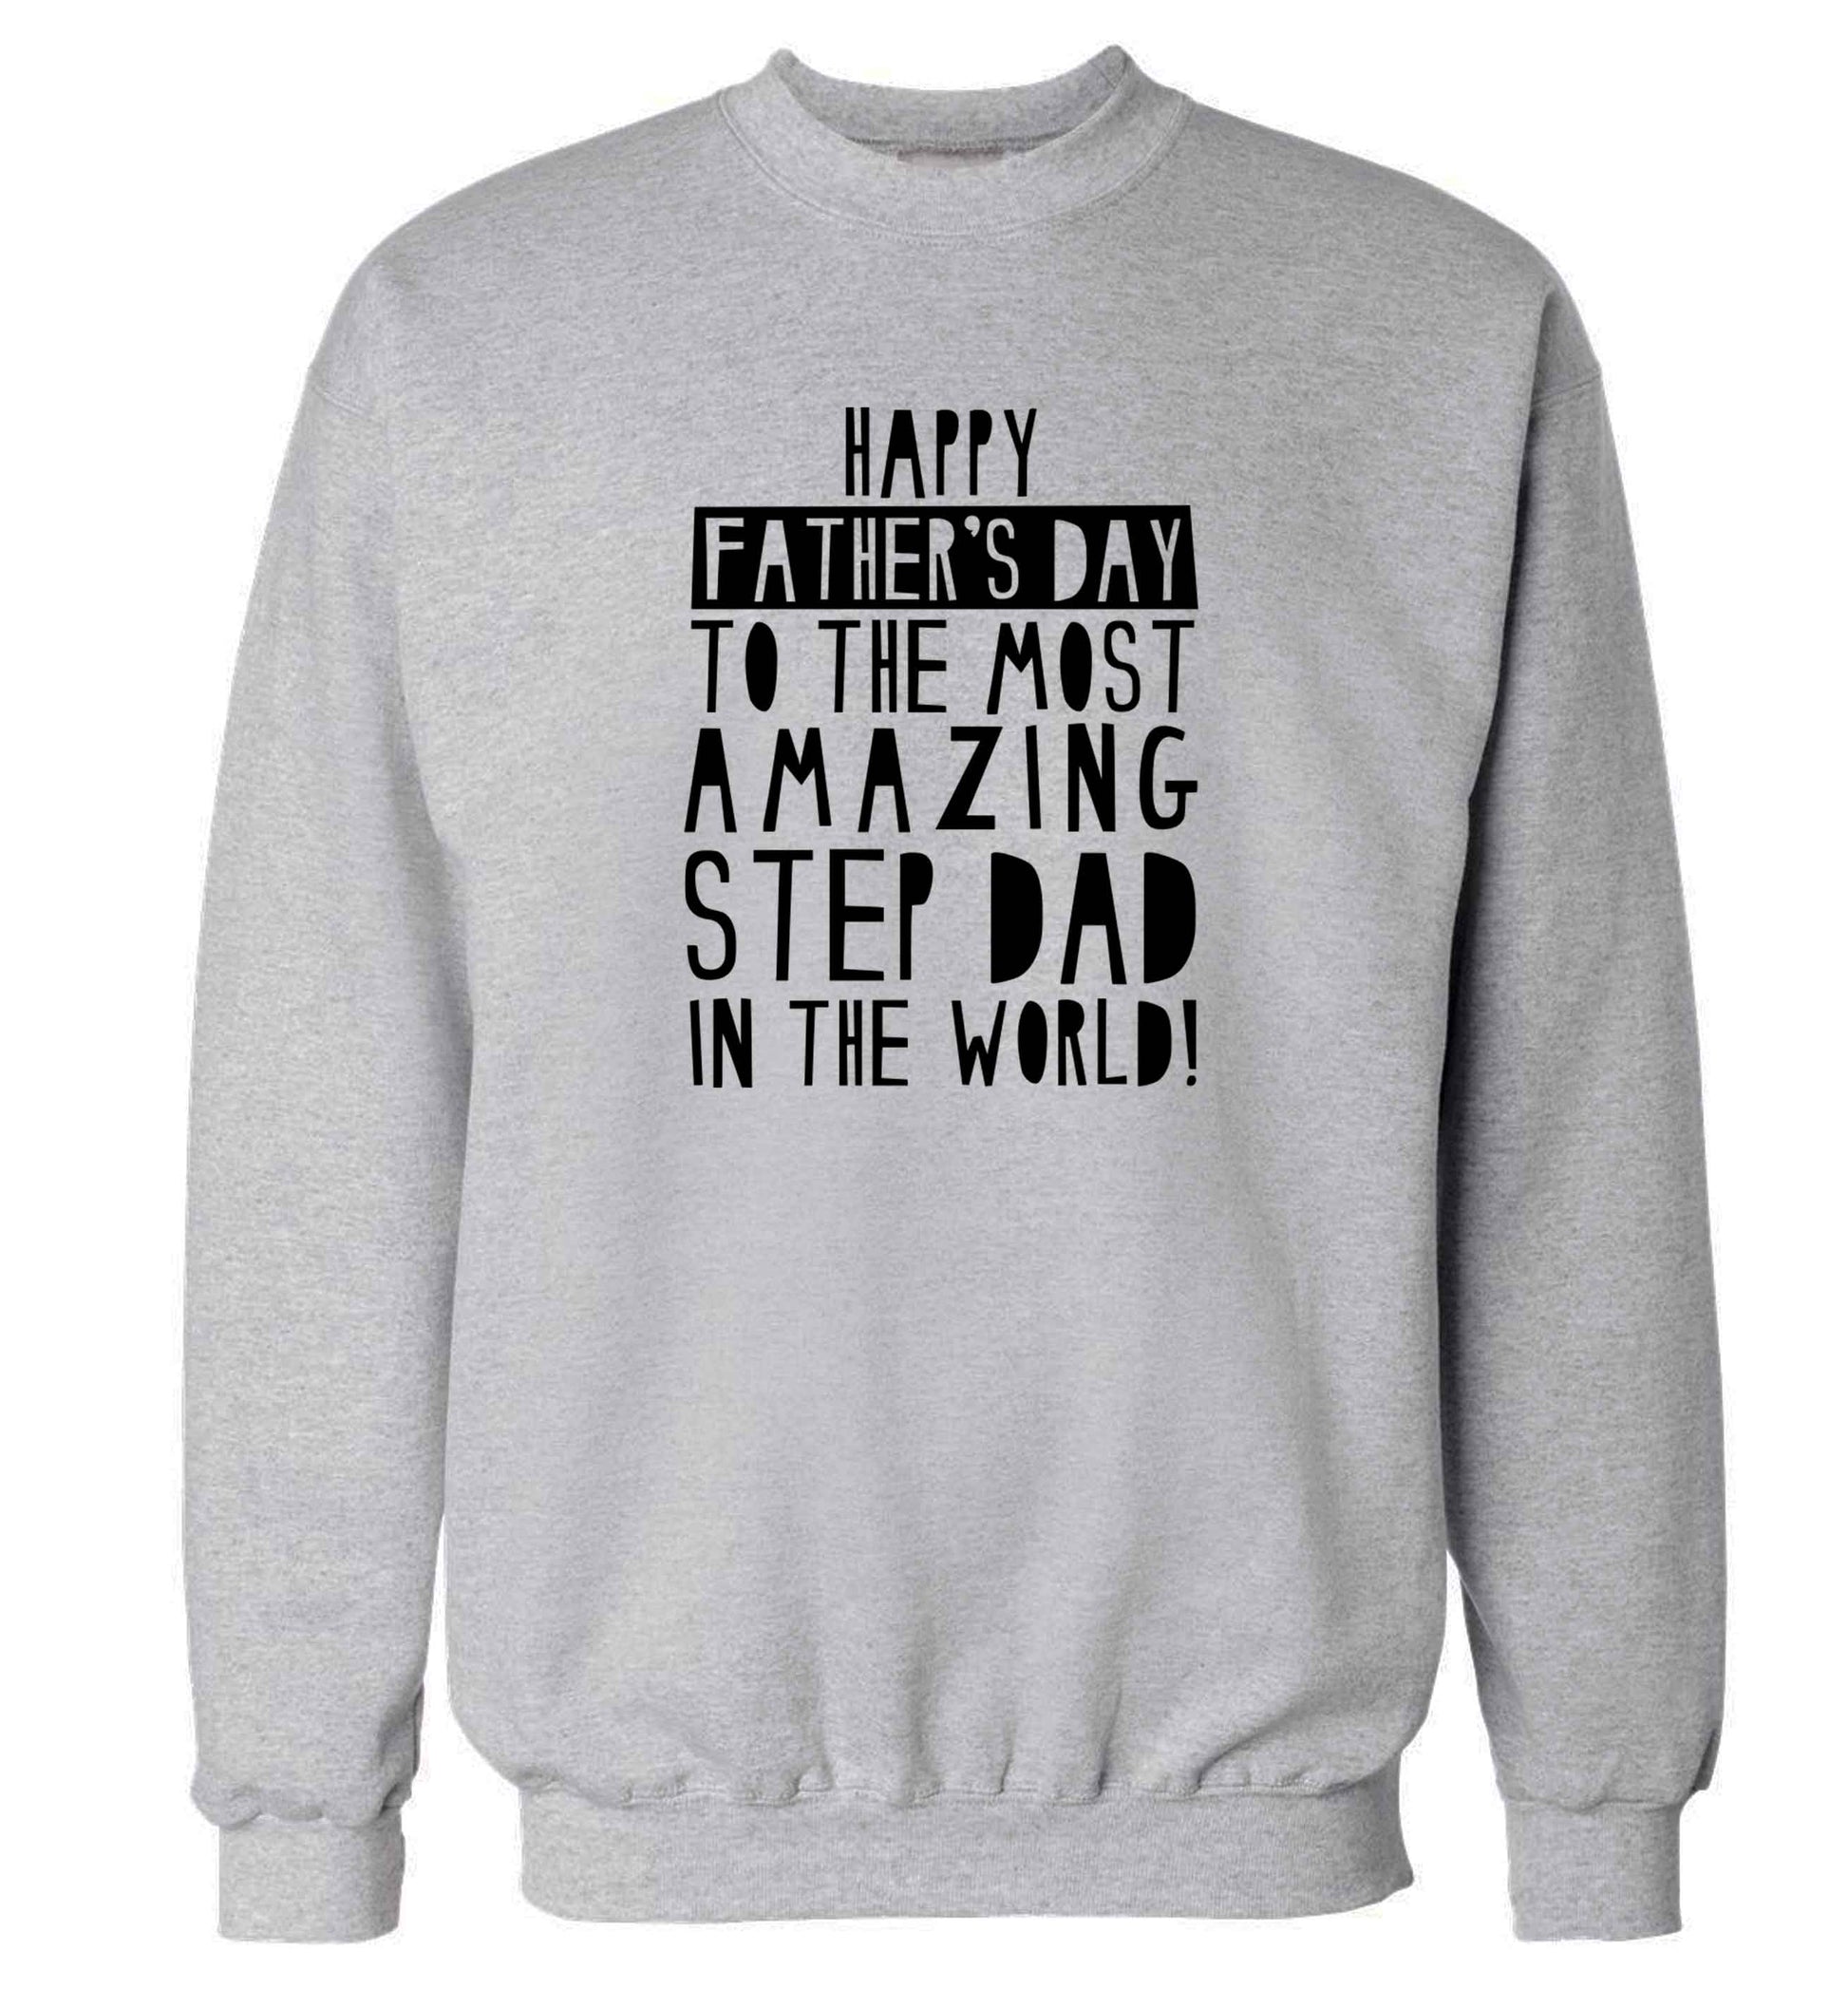 Happy Father's day to the best step dad in the world adult's unisex grey sweater 2XL